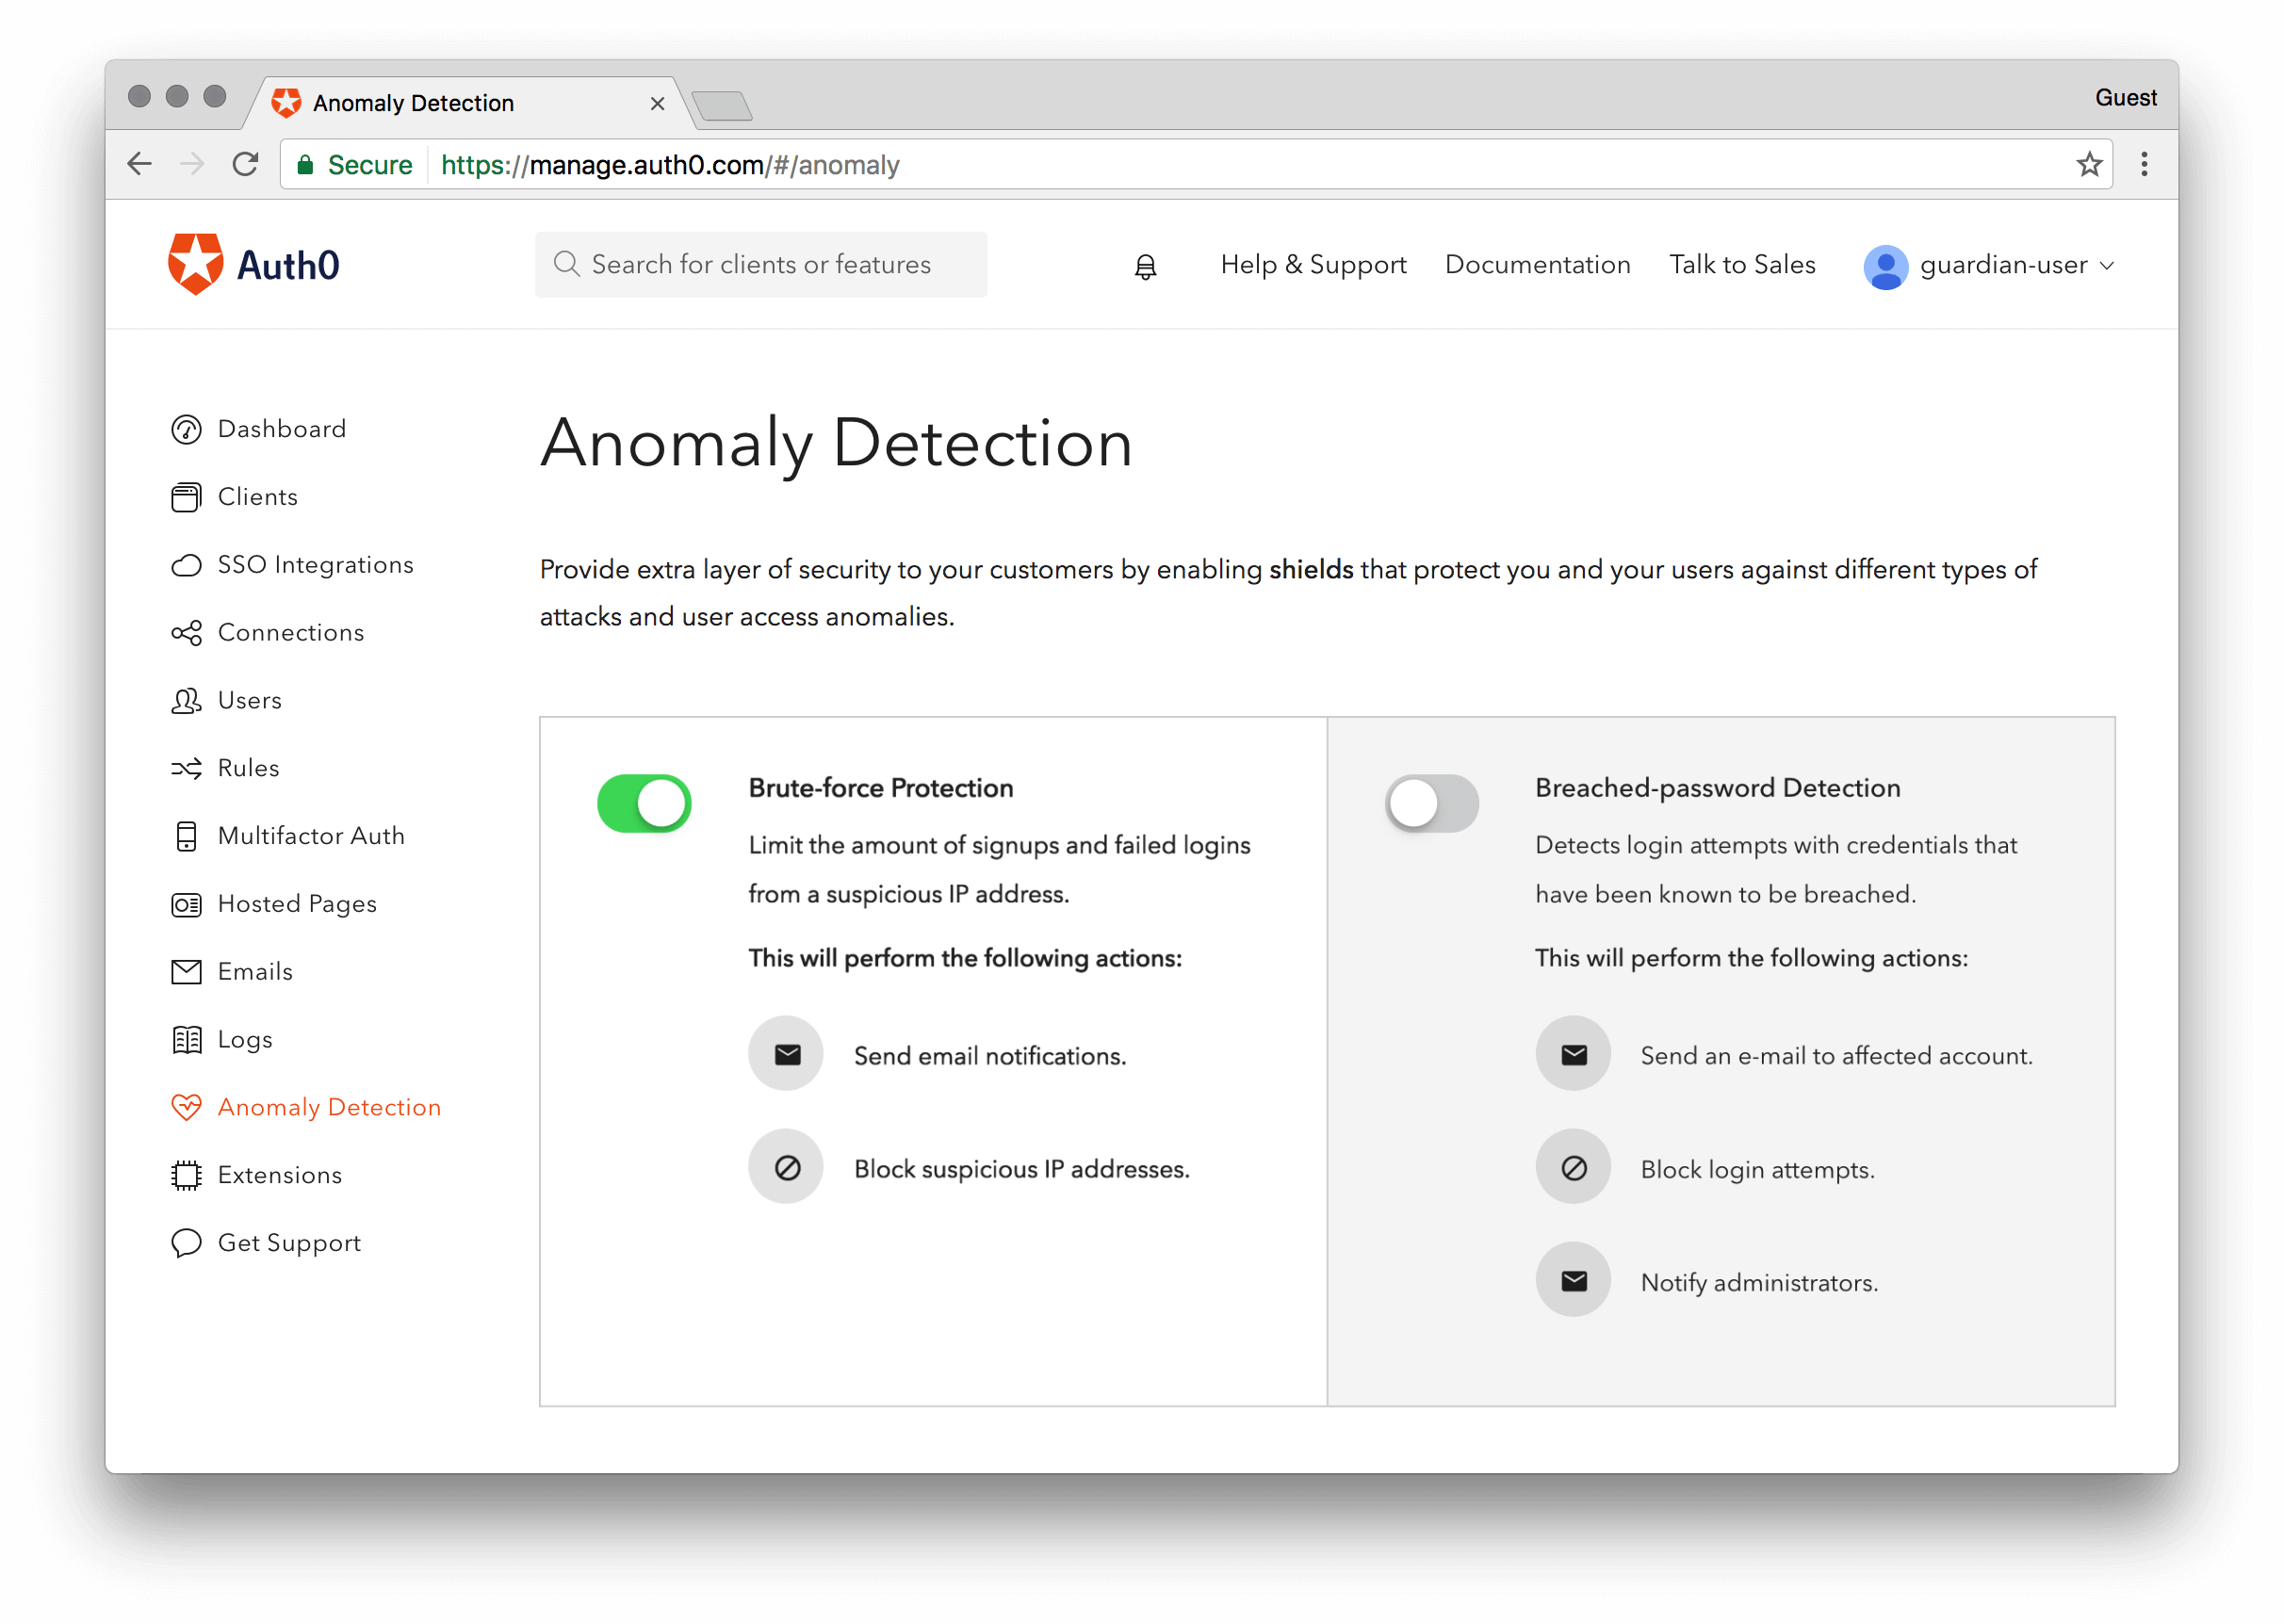 Anomaly detection example - offered by Auth0